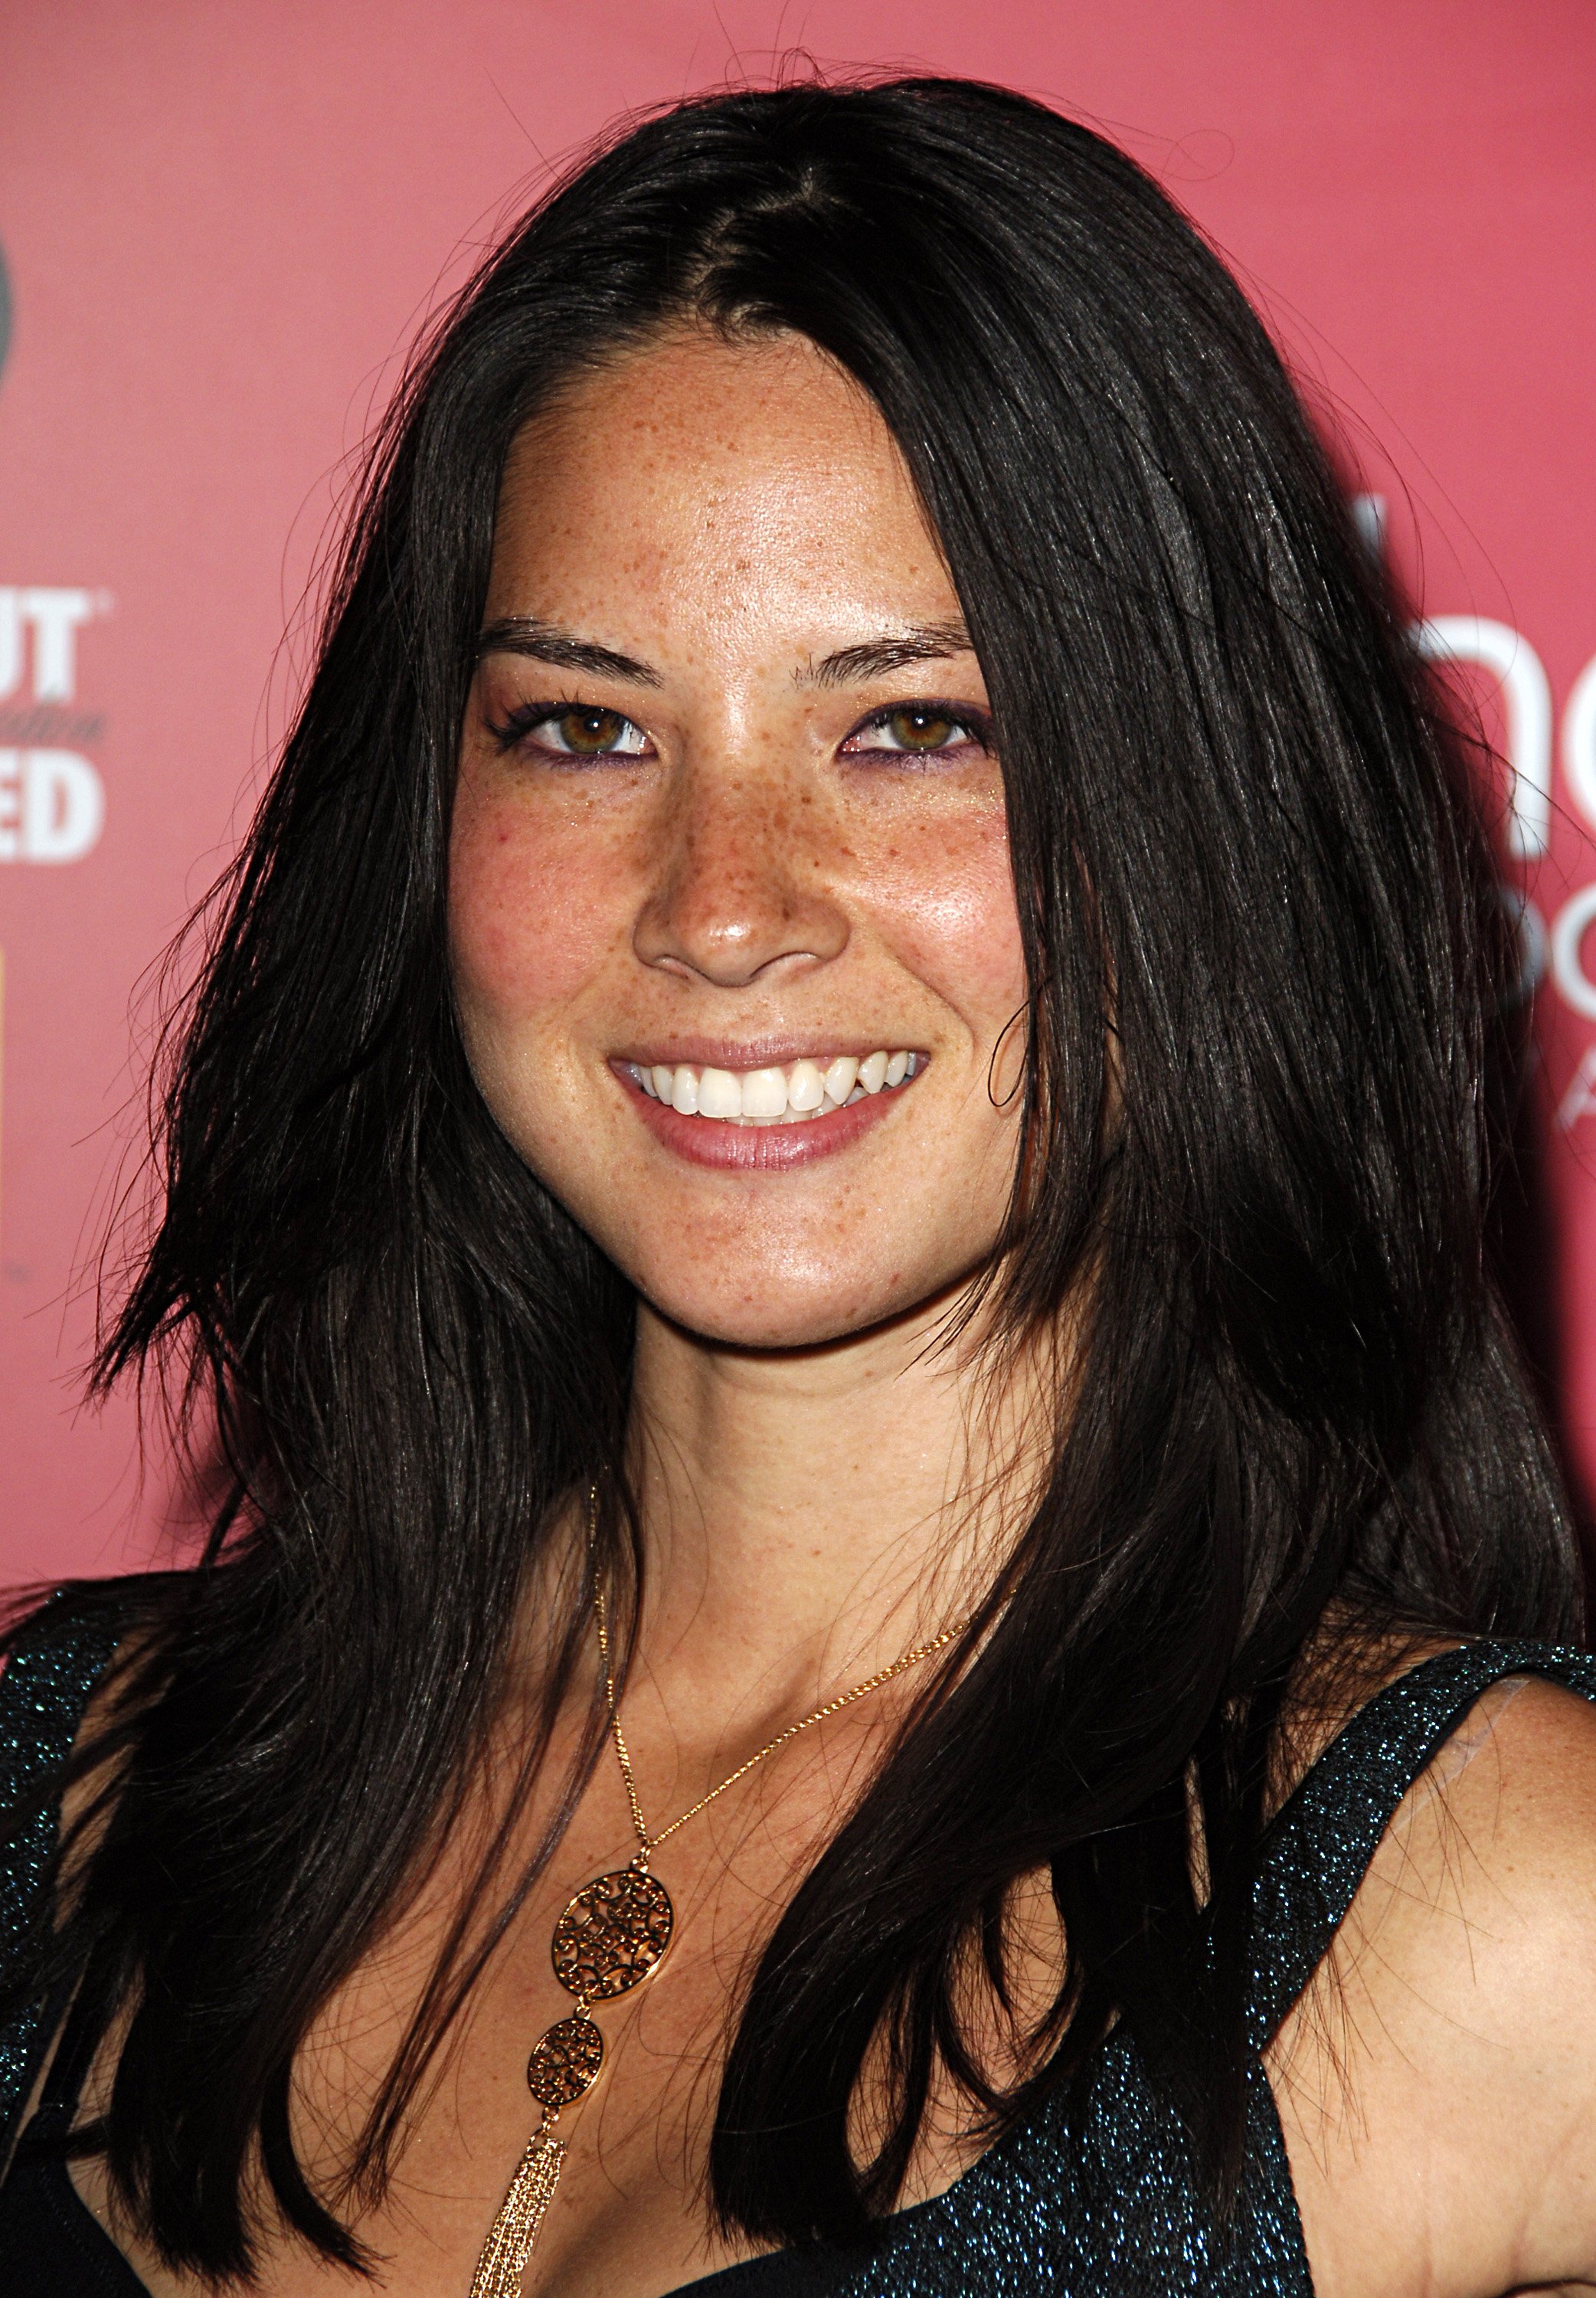 Olivia Munn on April 27, 2006 at the US Weekly Hot Hollywood Awards | Source: Getty Images 